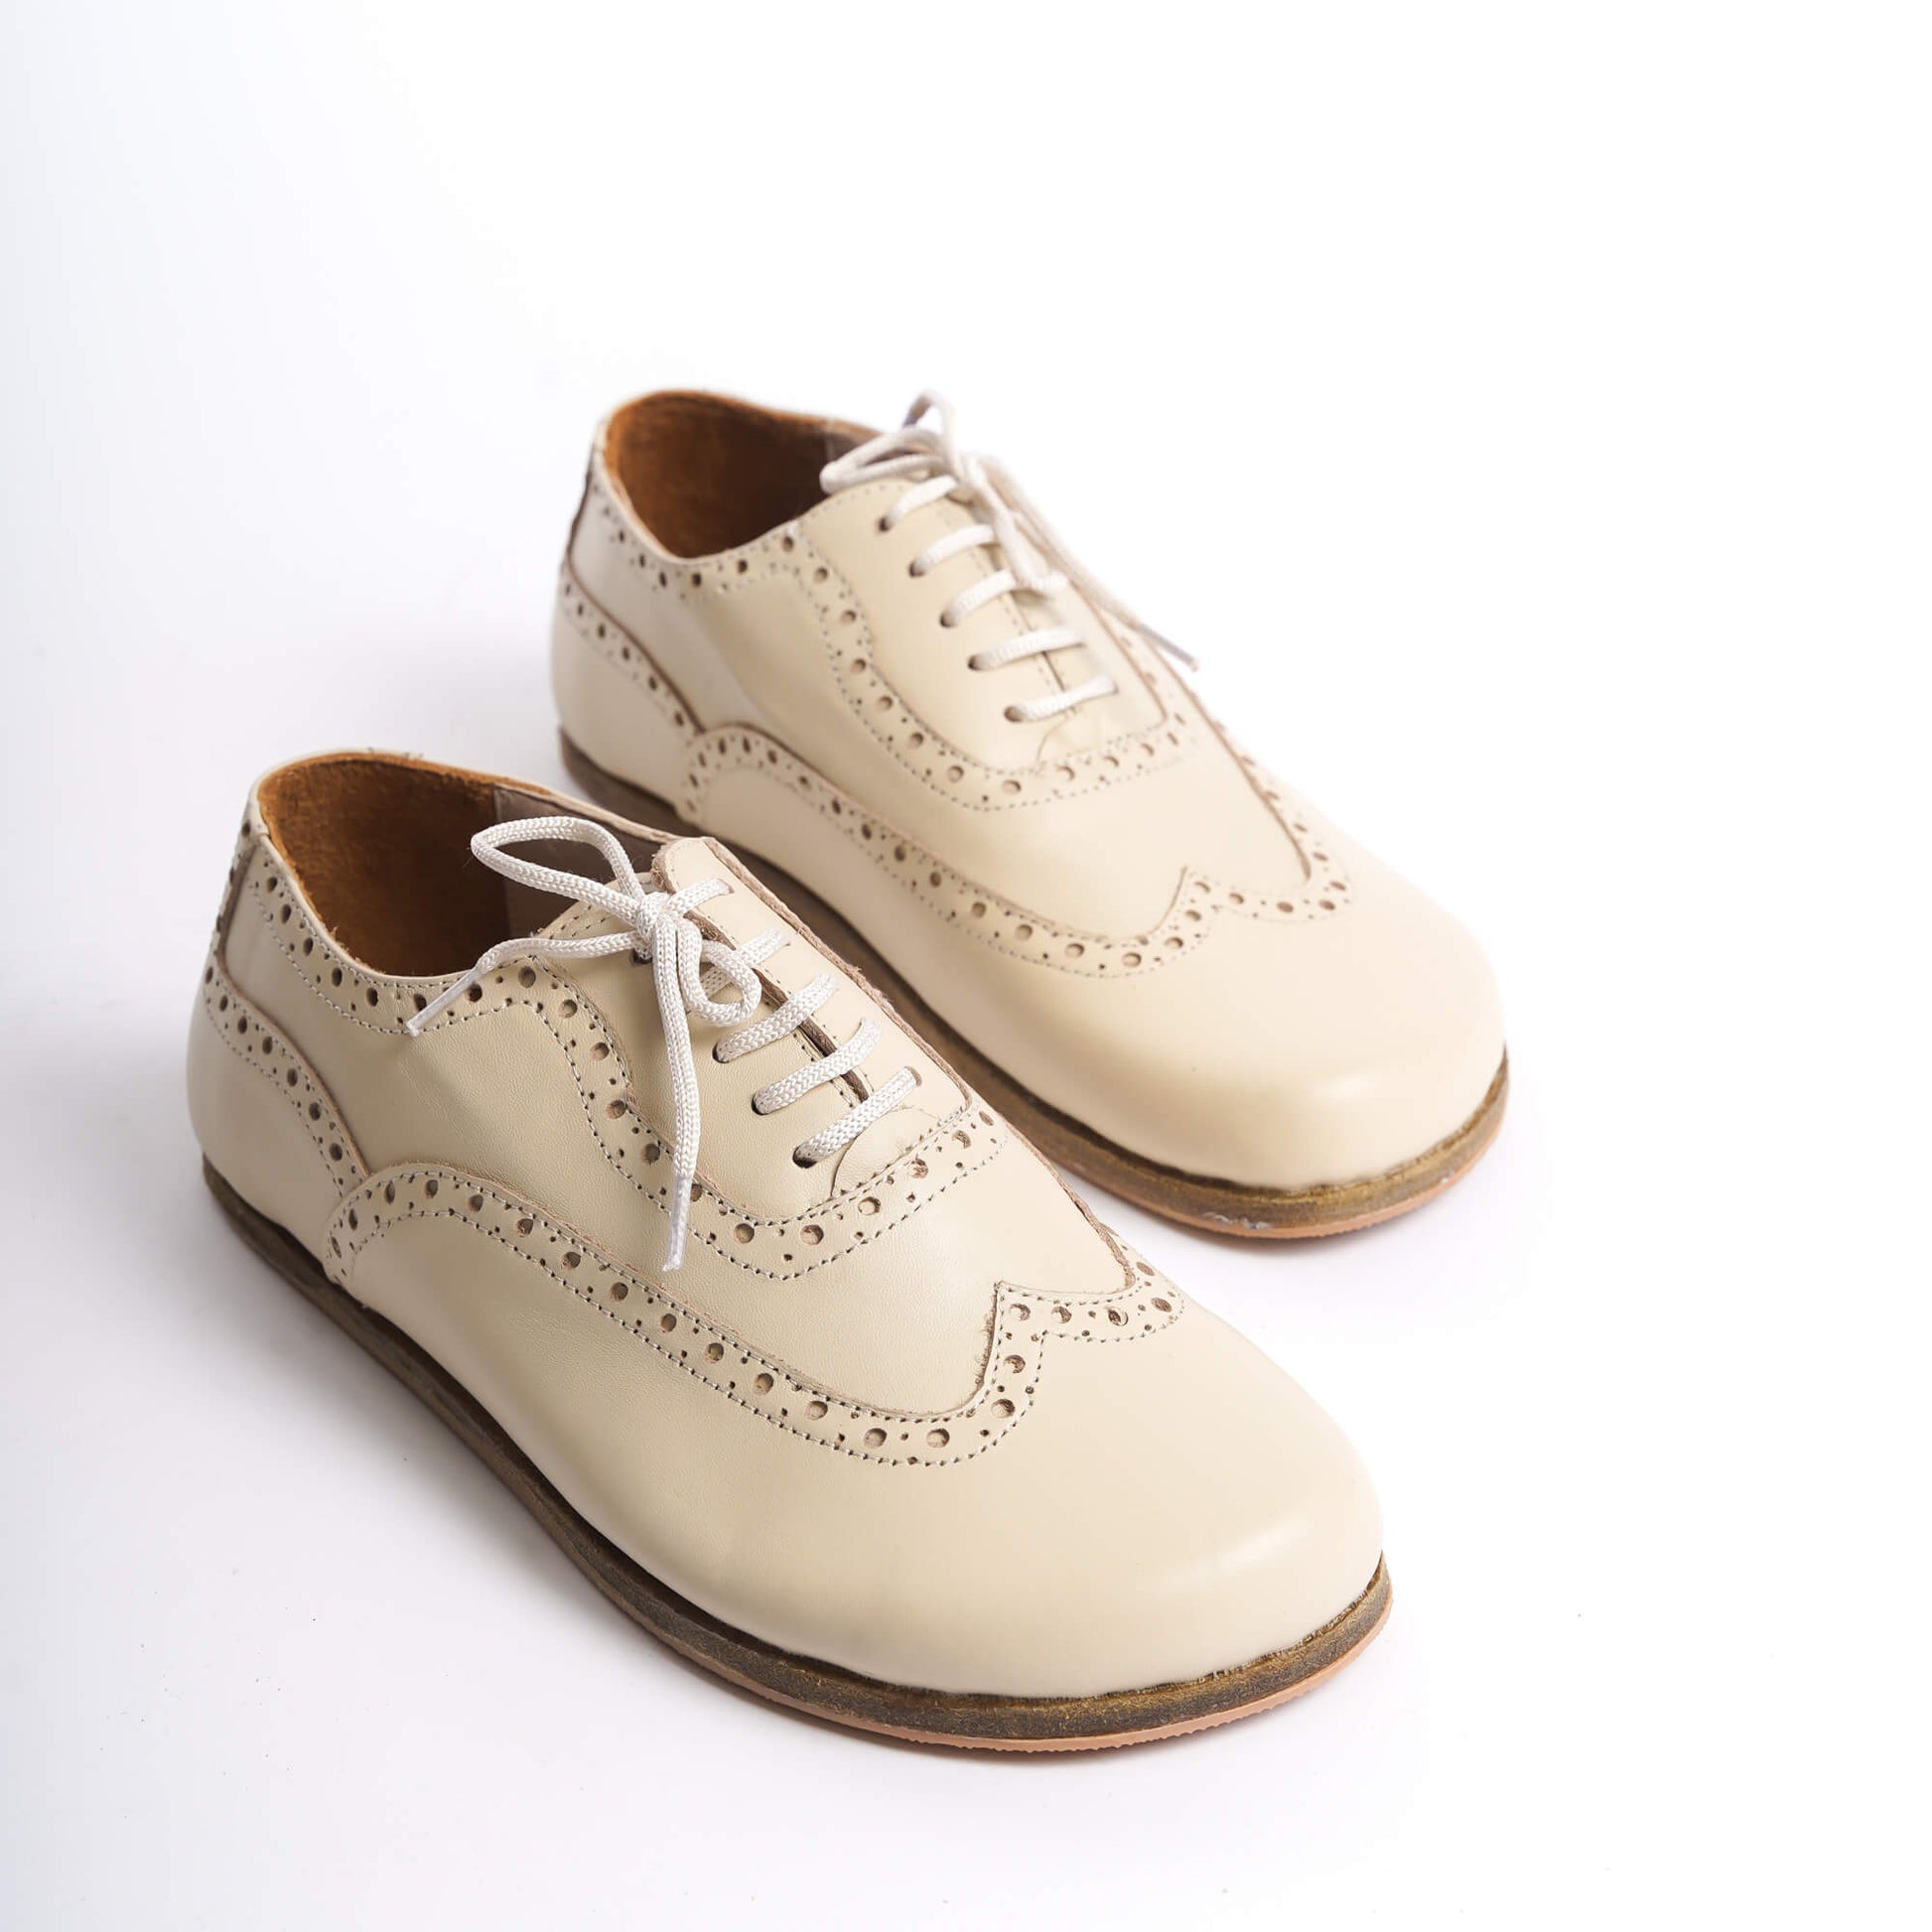 Close-up view of Doris Leather Barefoot Women's Oxfords in beige on a white background, showcasing intricate brogue detailing.